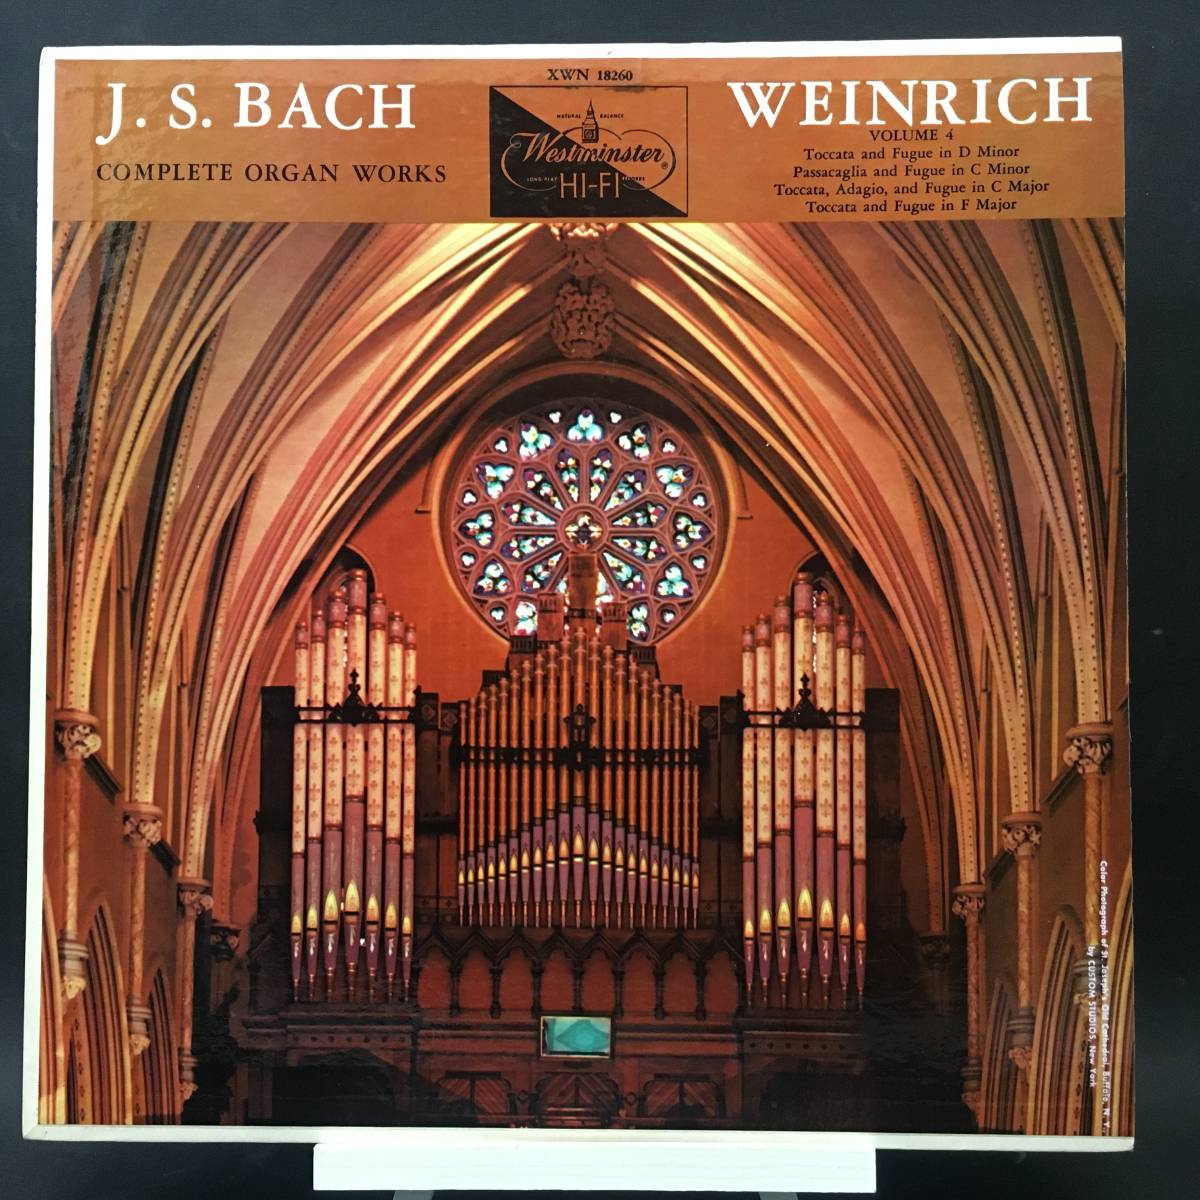 ◆ complete organ works of Bach Vol.4 ◆ Carl Weinrich ◆ Westminster 米 深溝_画像1